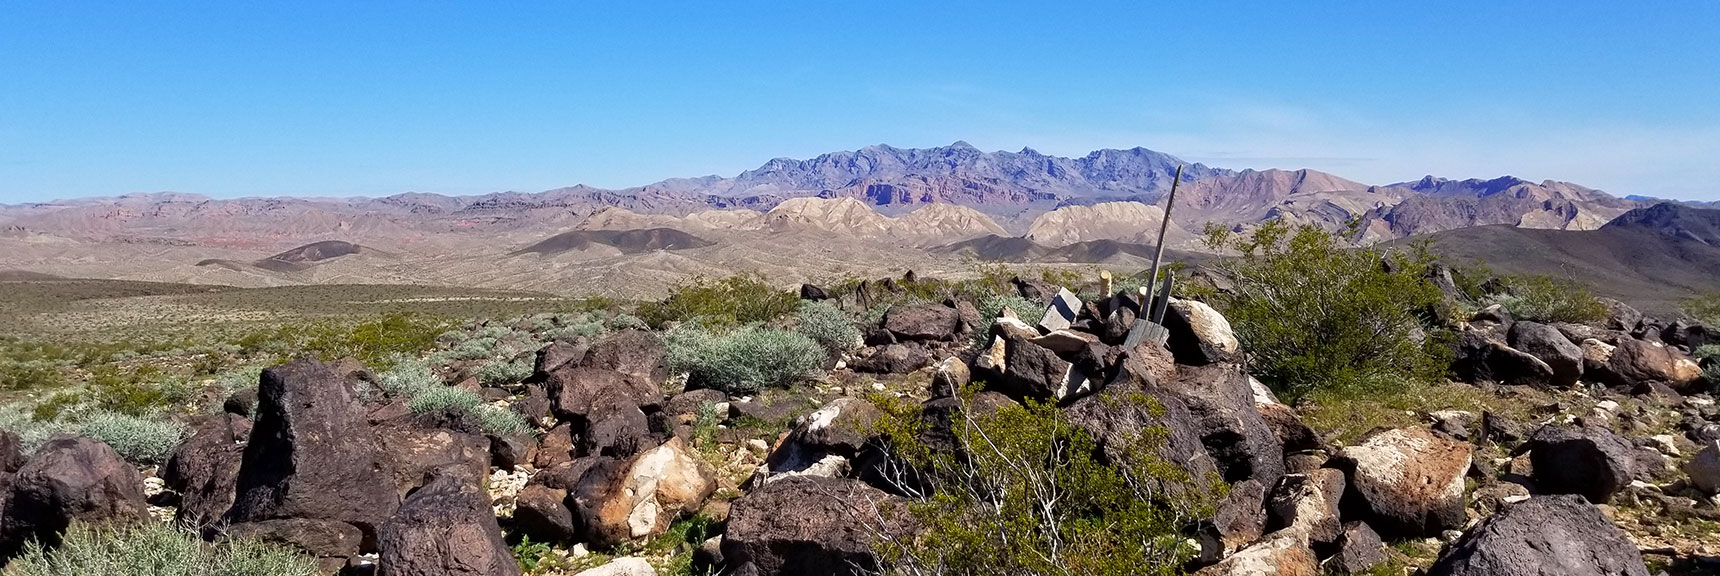 View Toward Muddy Mountains from Black Mesa in Lake Mead National Recreation Area, Nevada